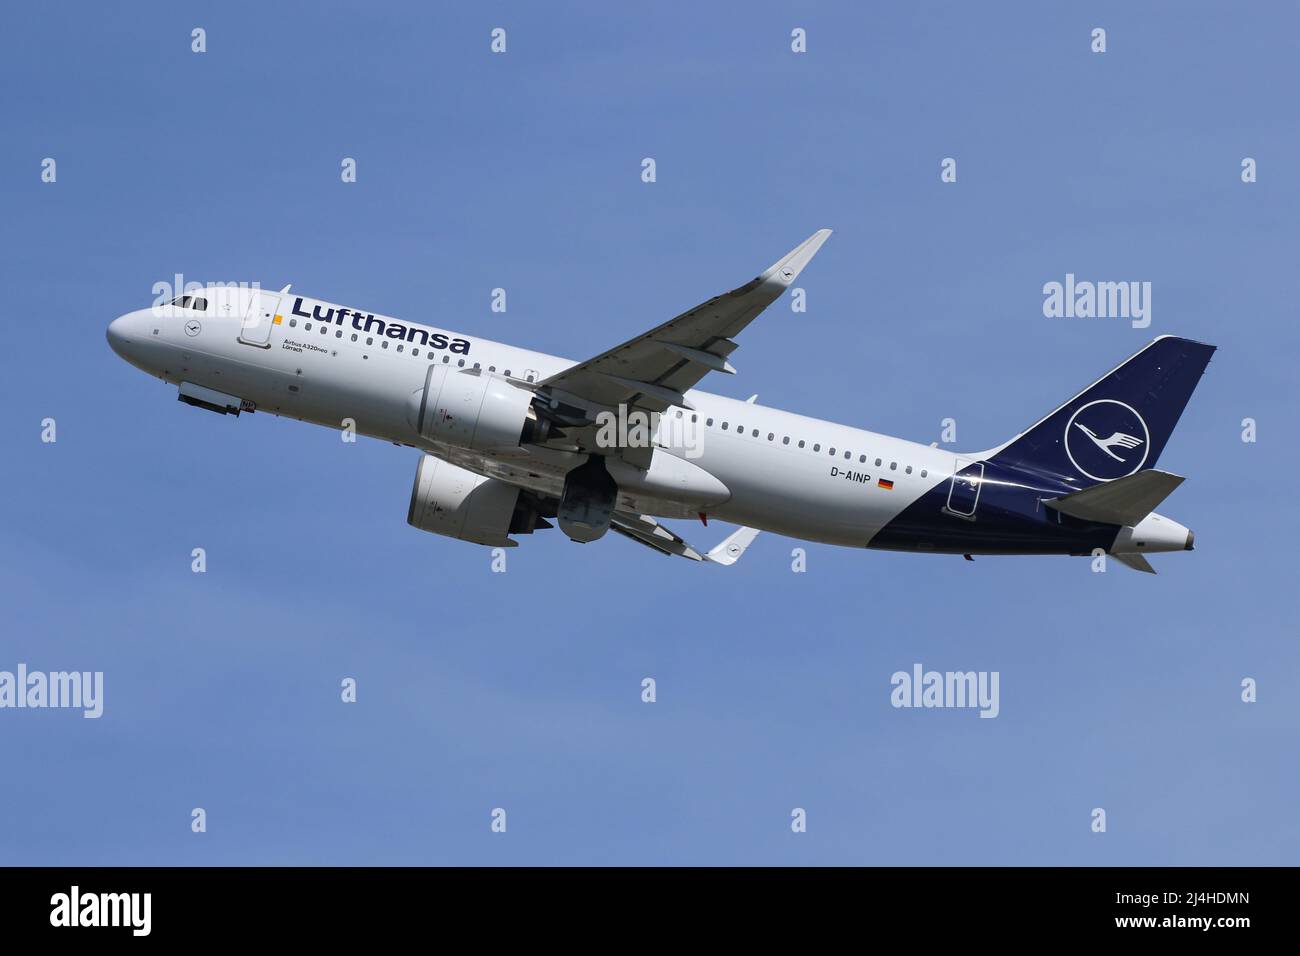 An Airbus A320 NEO operated by Lufthansa departs from London Heathrow Airport Stock Photo